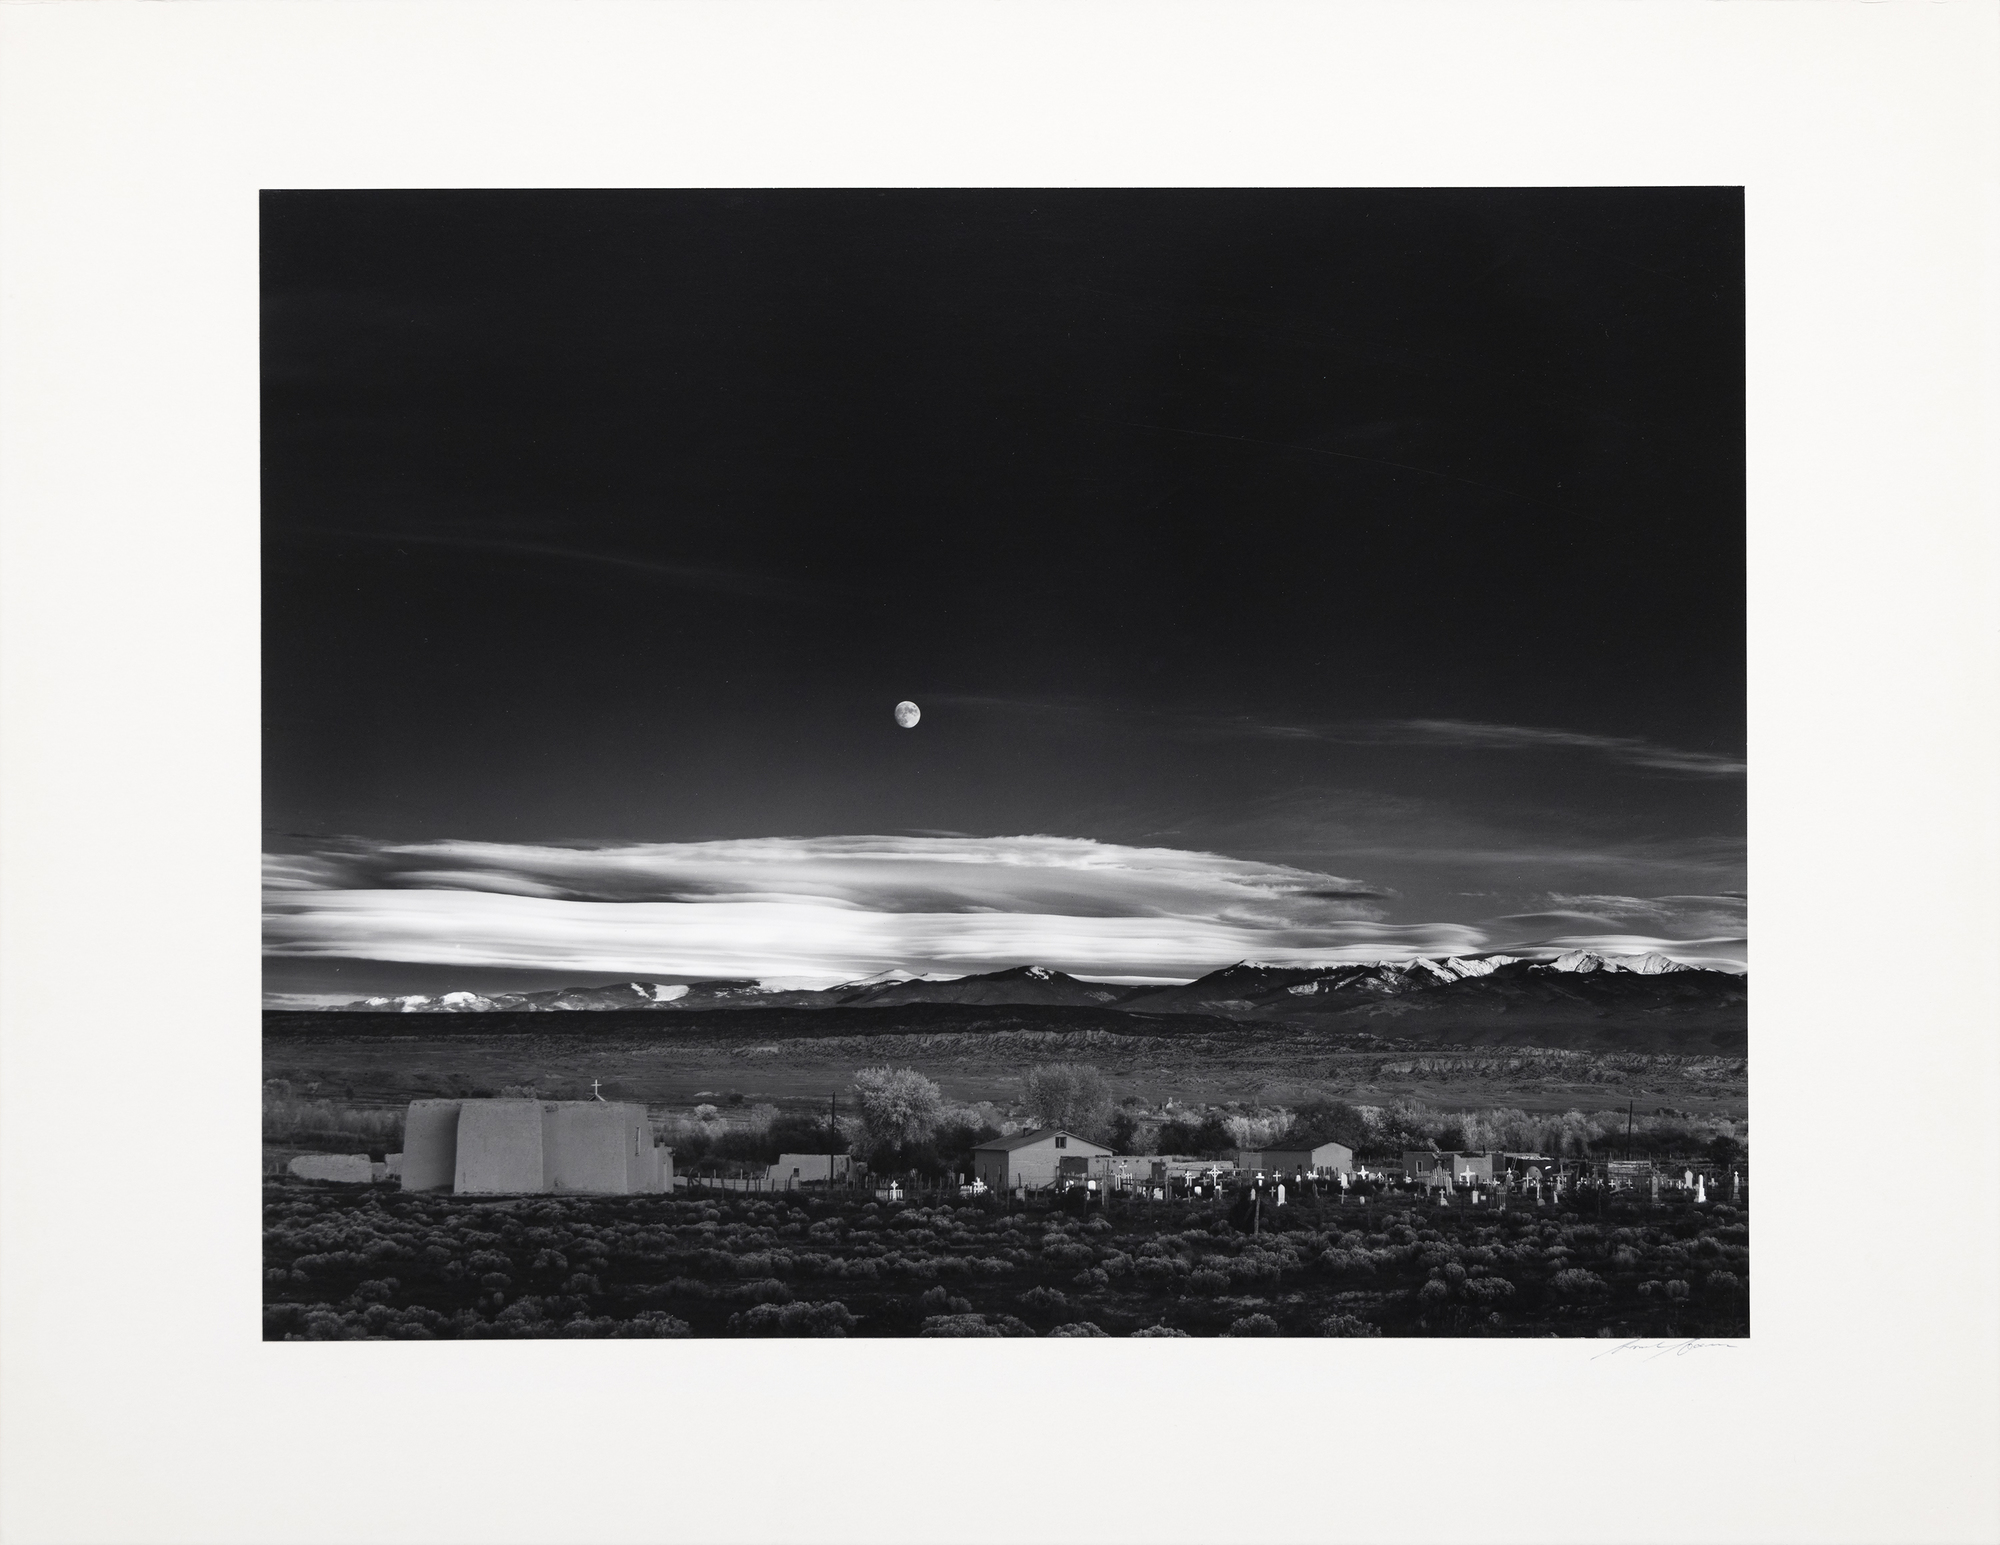 Known for his rigorous engagement in the darkroom, Ansel Adams created 1,300 prints of Moonrise, Hernandez over 40 years of dodging and burning, creating a longitudinal group of masterworks. Moonrise is a formidable composition that holds us in suspended appreciation for its hauntingly beautiful impression. We do not need to know of Ansel's desperate scramble to set his tripod, find his meter to grasp that transience, or ponder the kismet of capturing that moment. In this 1959 print, all the glorious details are present: the almost, but not quite, full moon with its discernable features and the essential graveyard with its glowing markers and starkly illuminated white crosses caught in the waning moment of daylight's inevitable retreat.